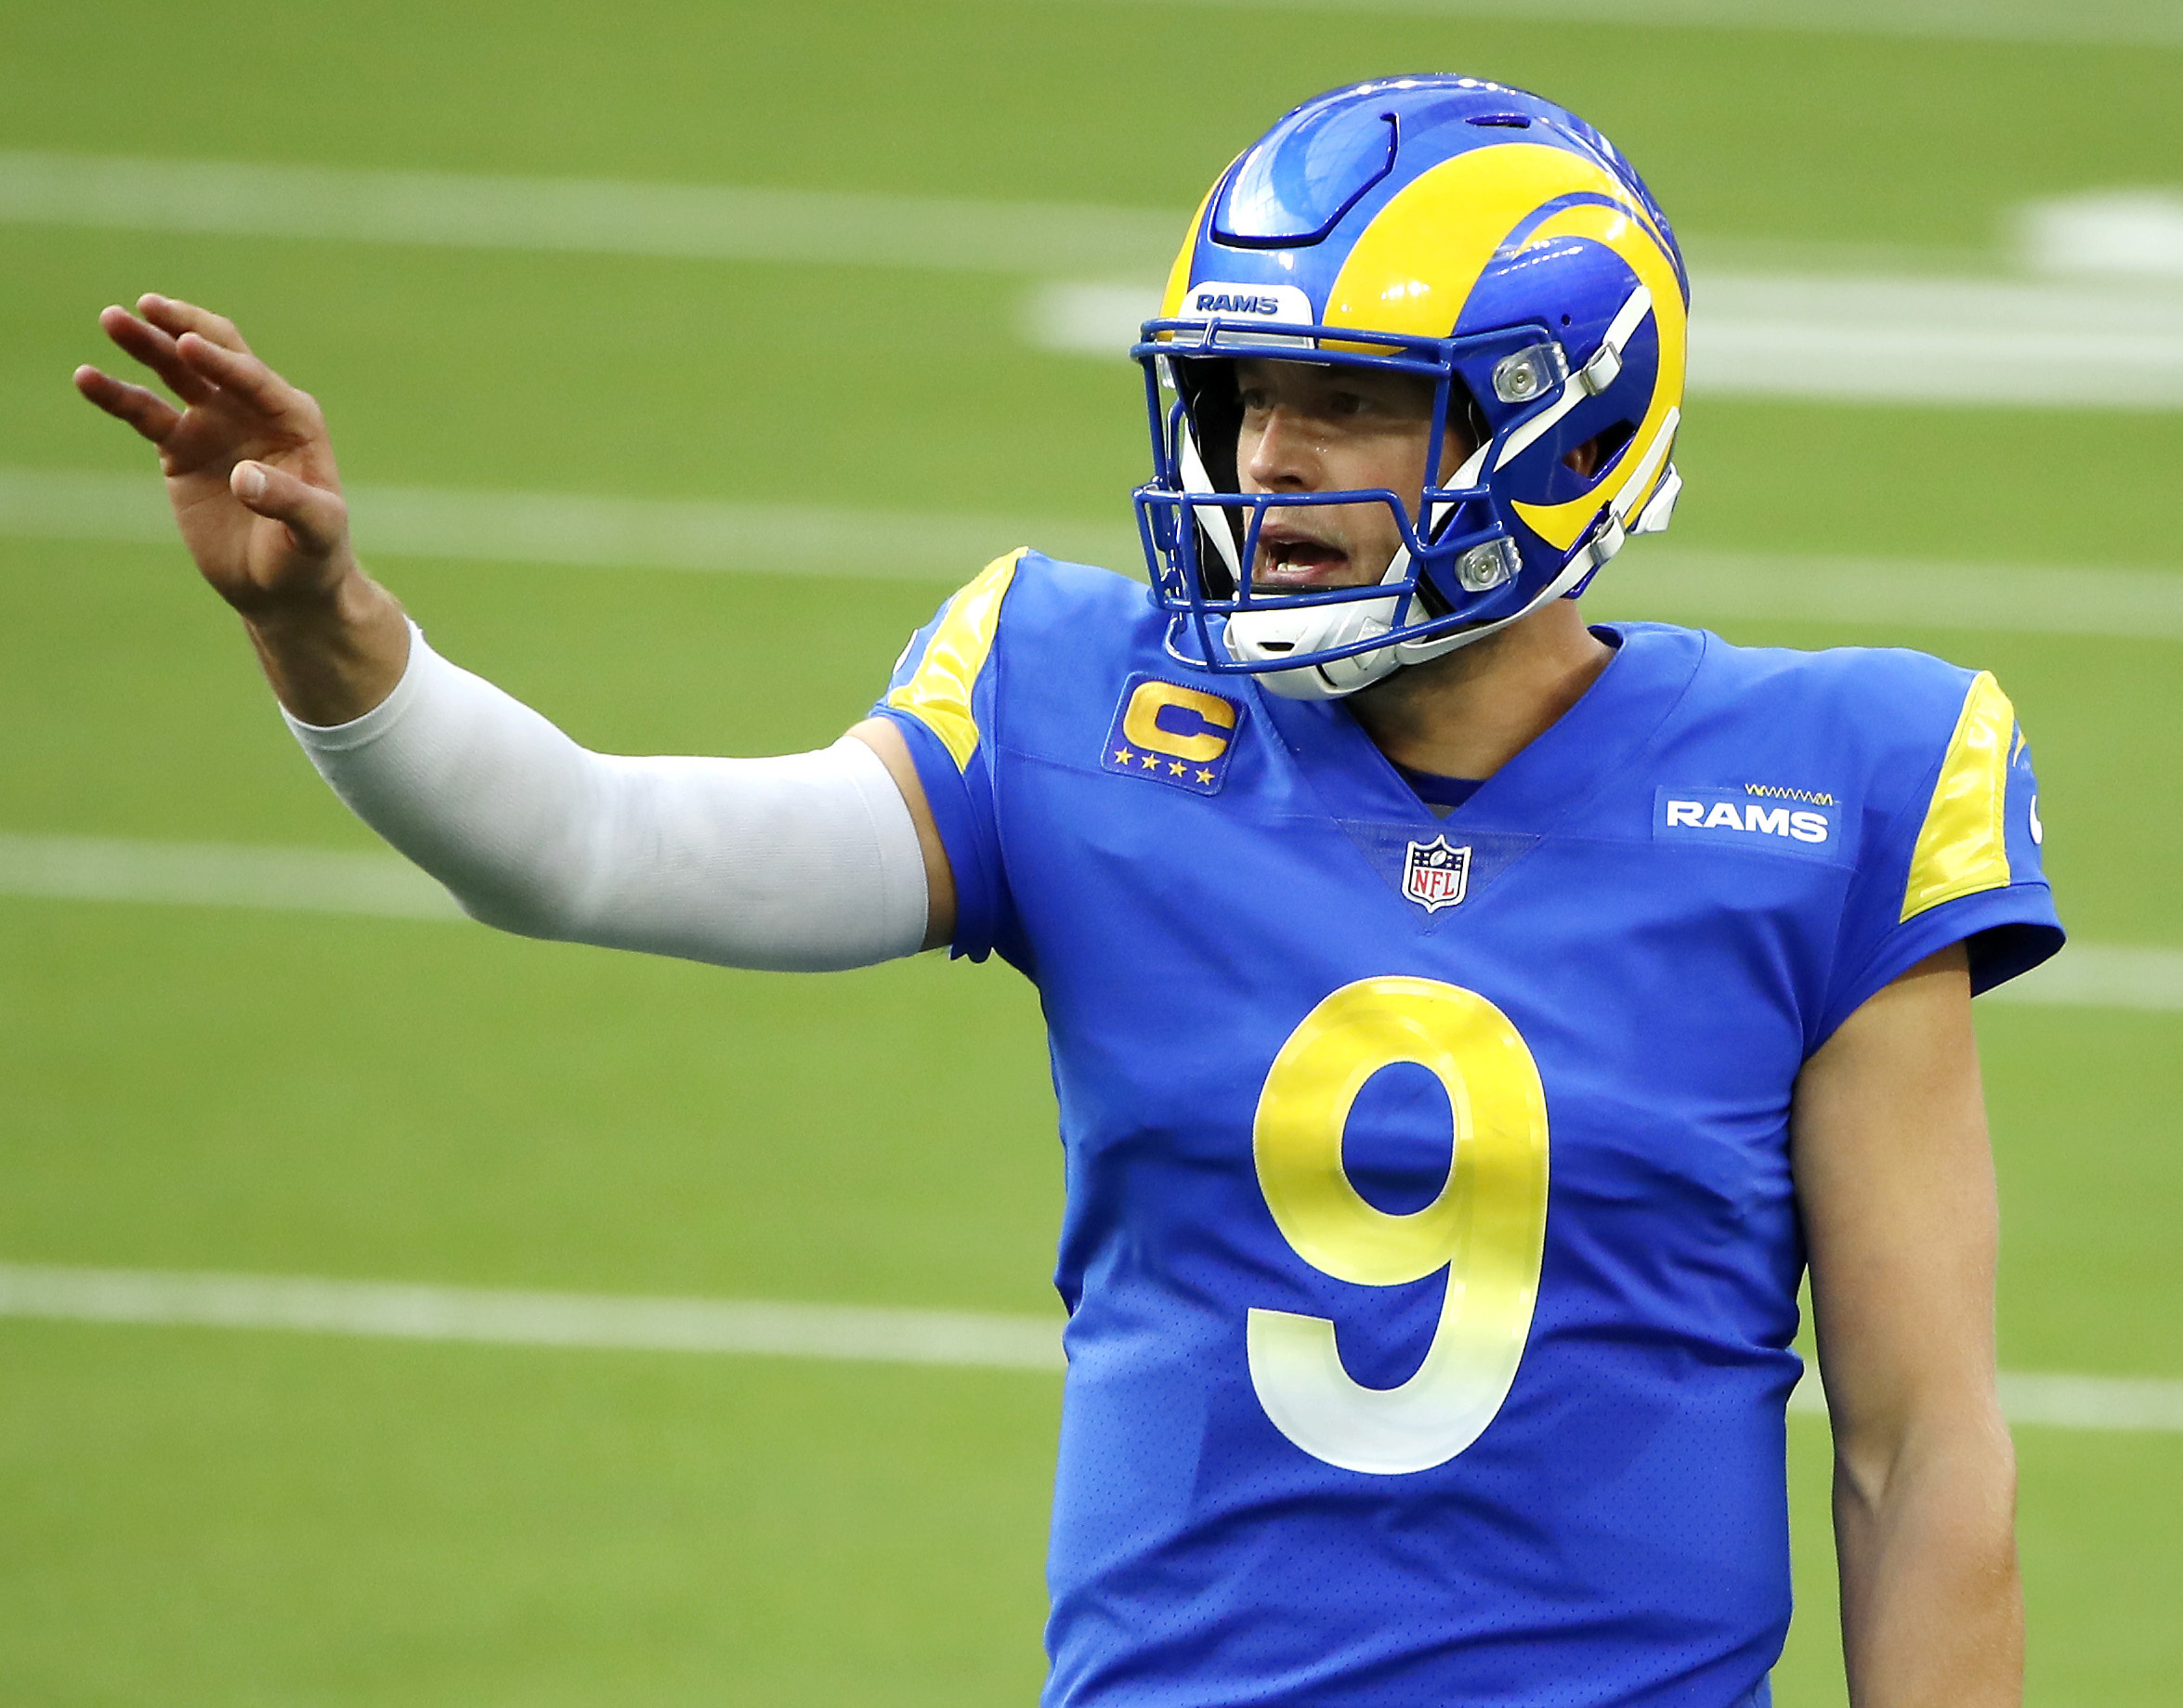 2021 NFL Week 8 expert picks: Against the spread, straight up